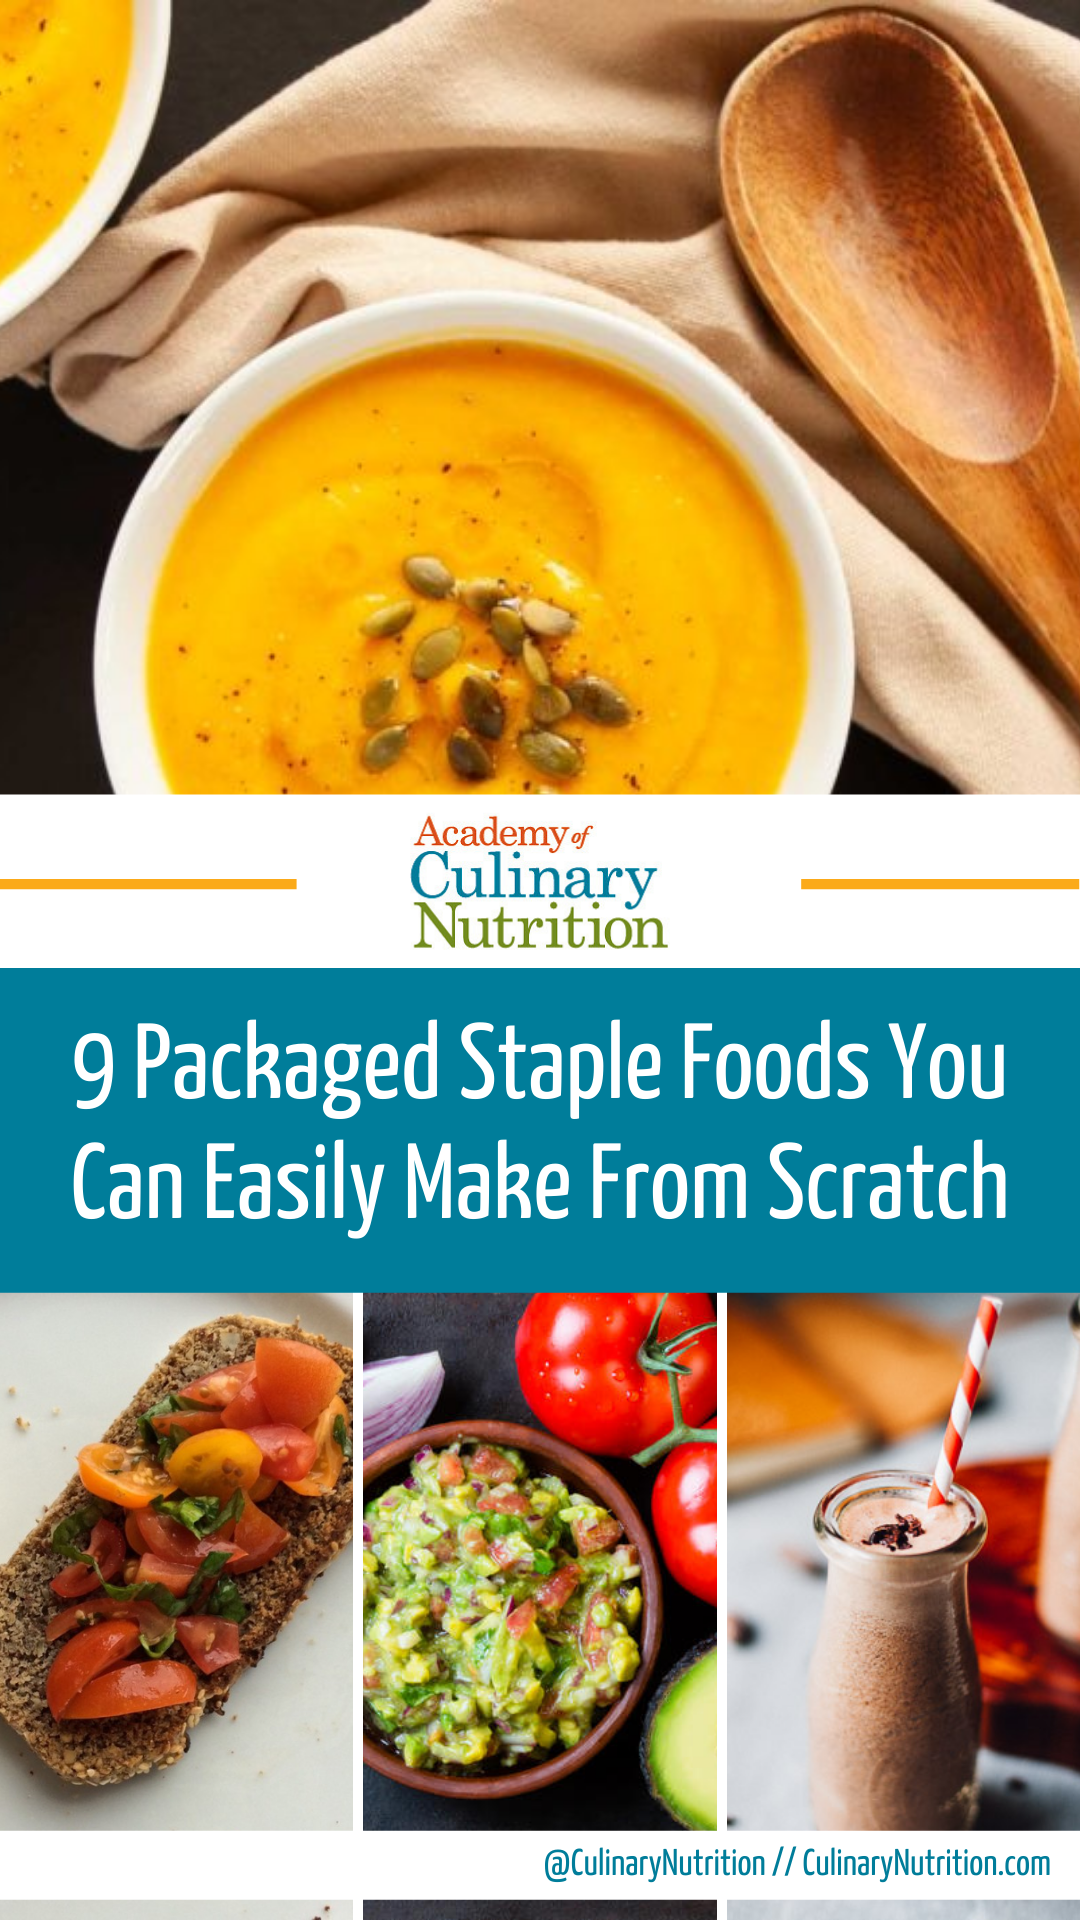 9 Packaged Staple Foods You Can Make Yourself